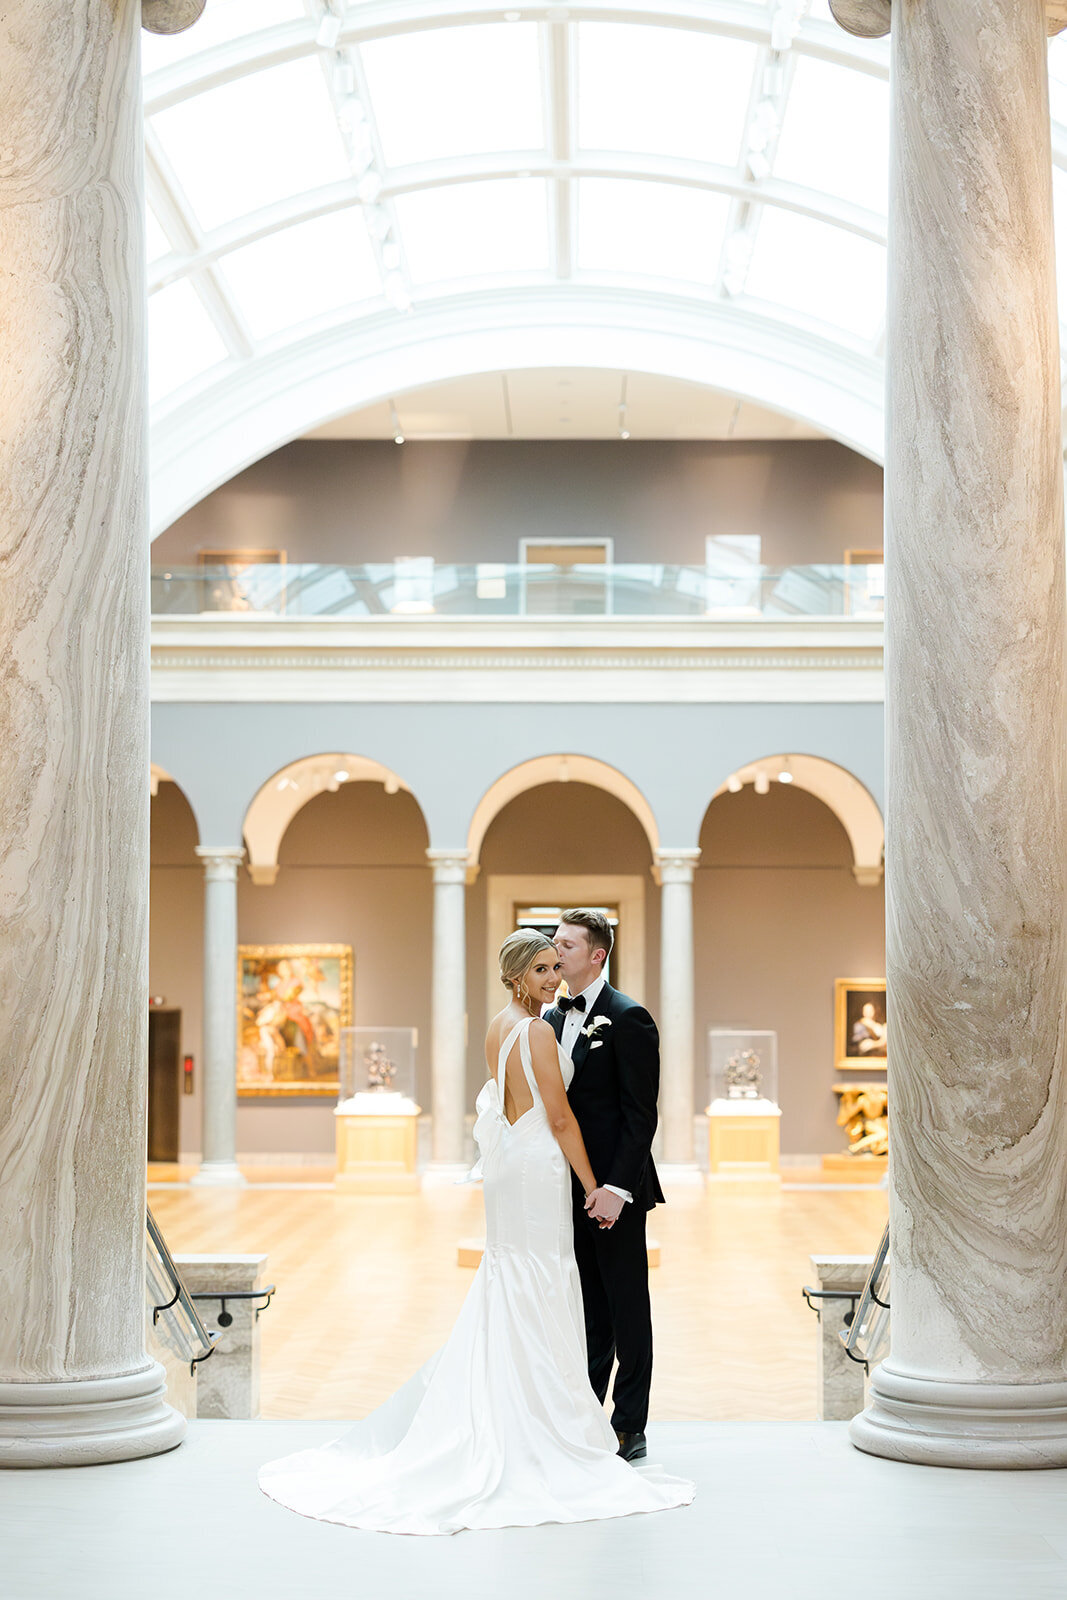 the-cannons-photography-cleveland--museum-of-art-wedding-photographer-66_websize